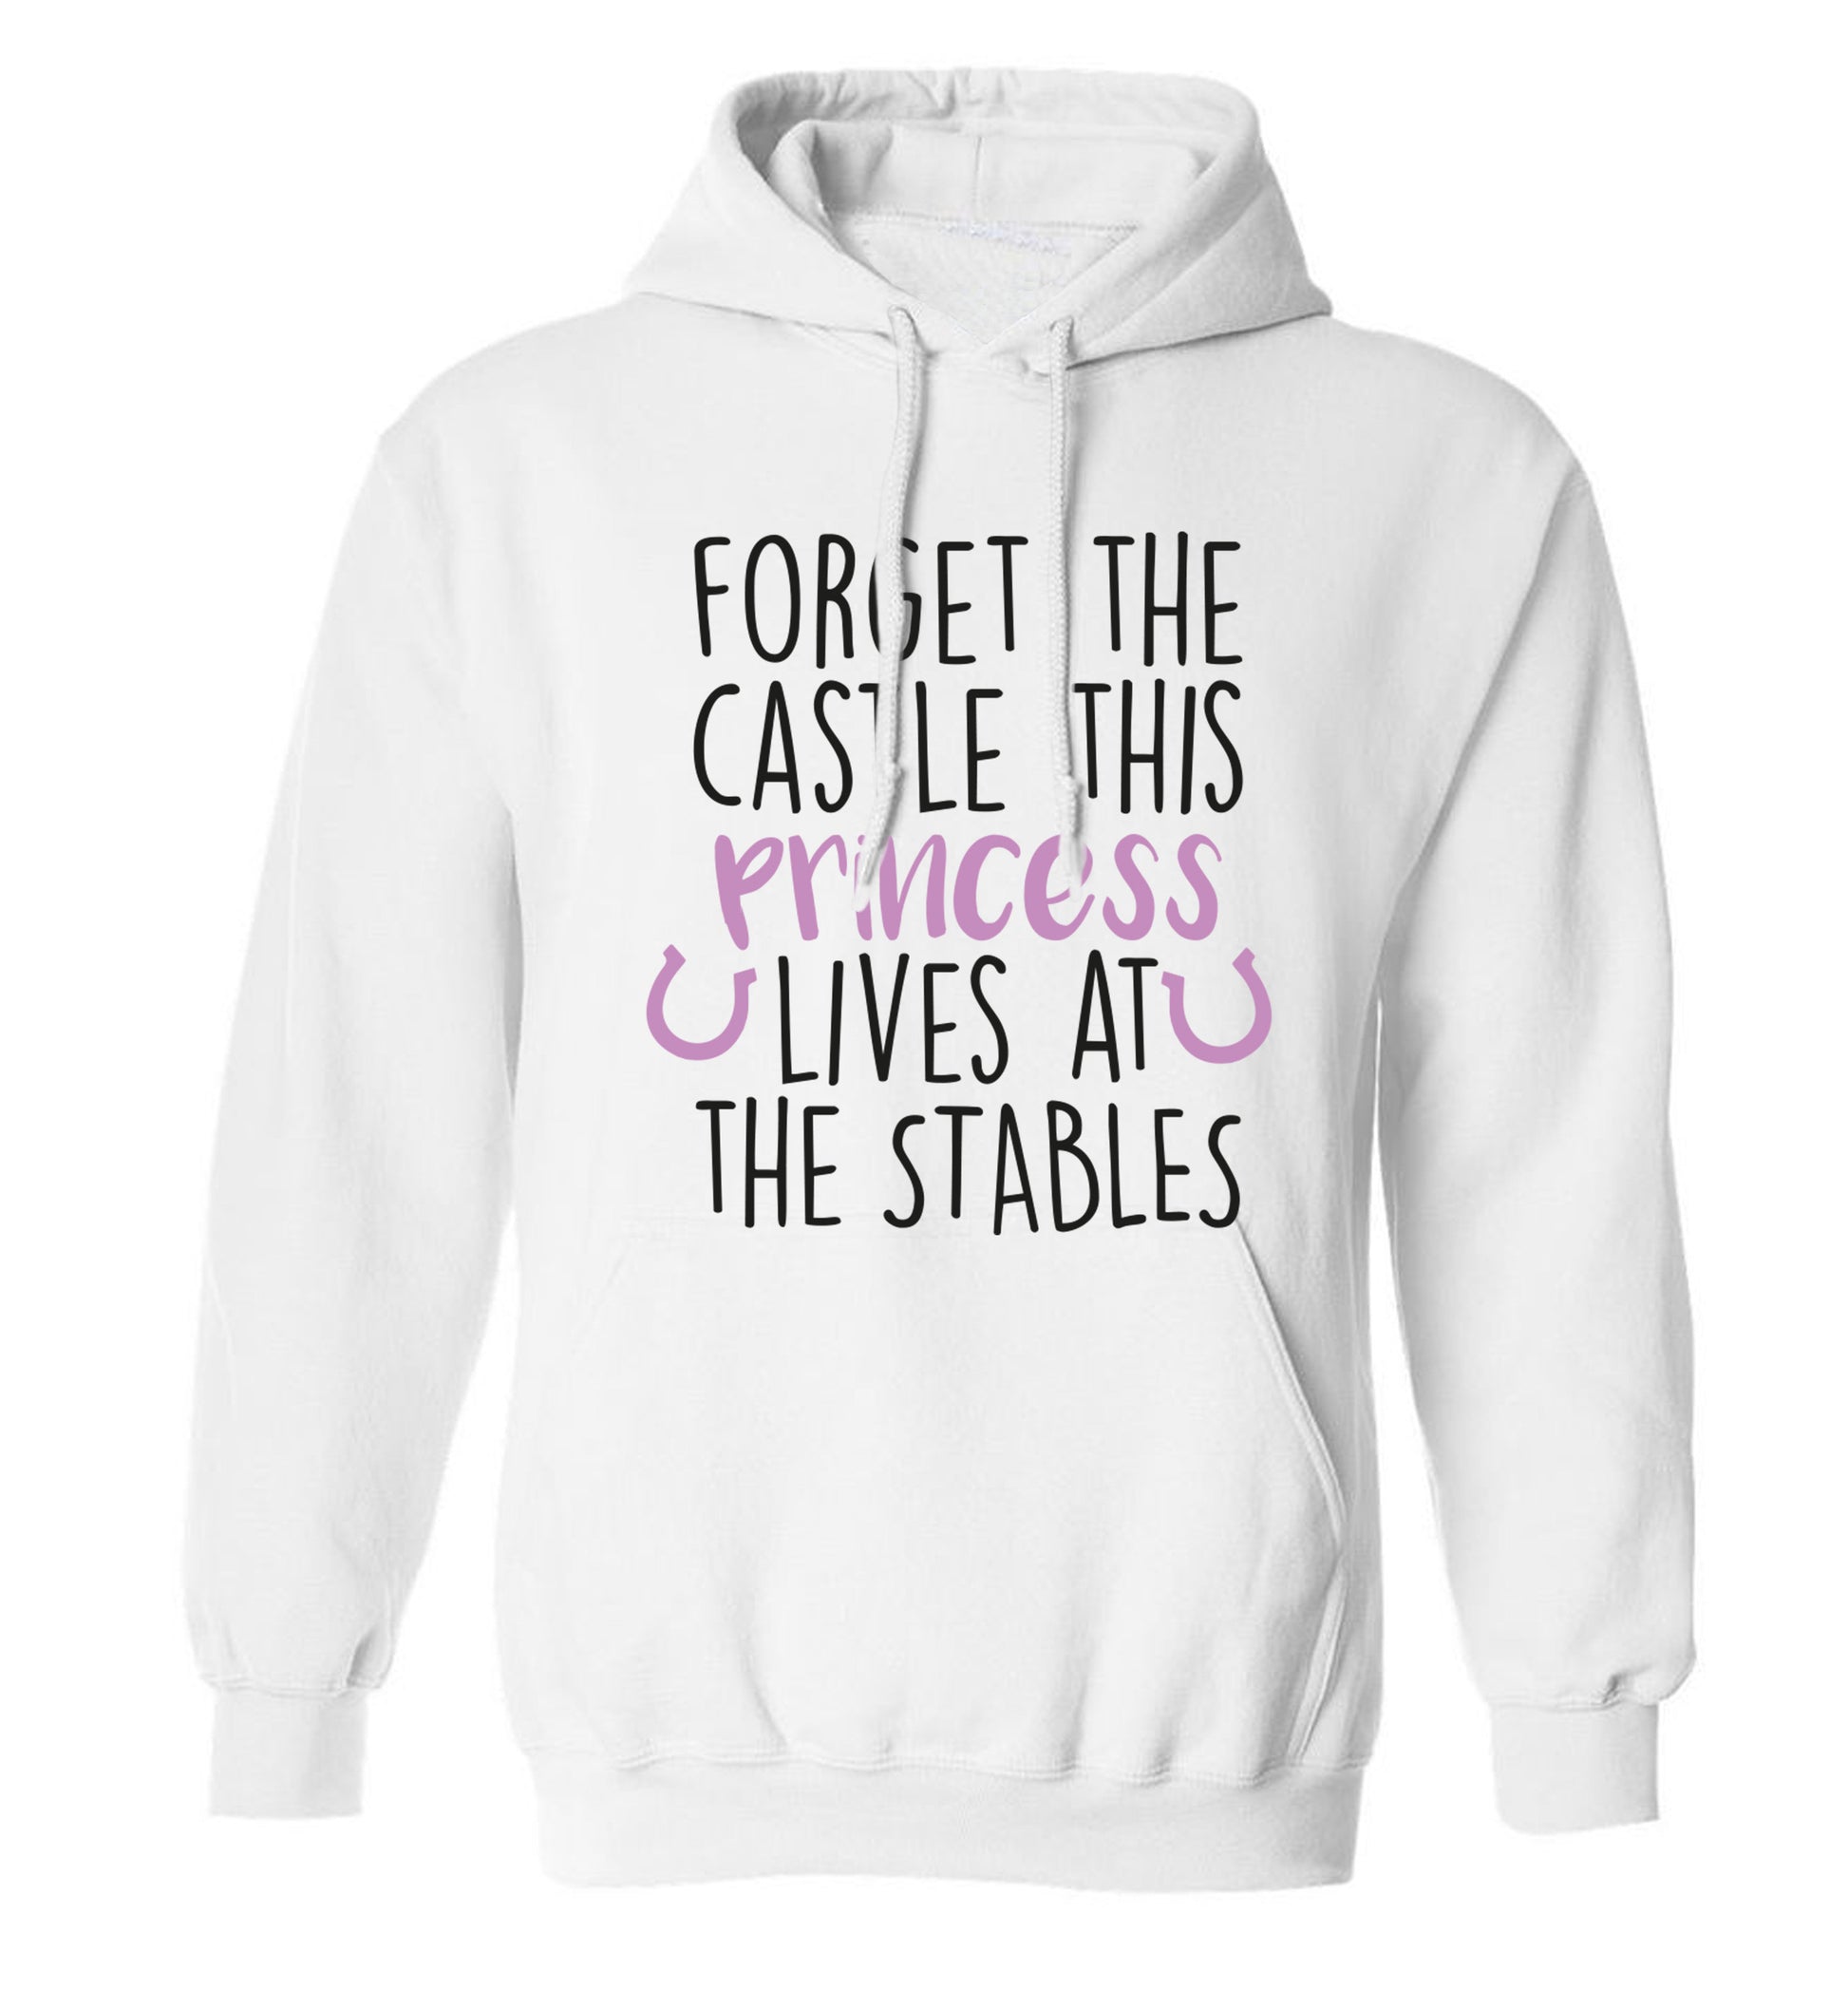 Forget the castle this princess lives at the stables adults unisex white hoodie 2XL